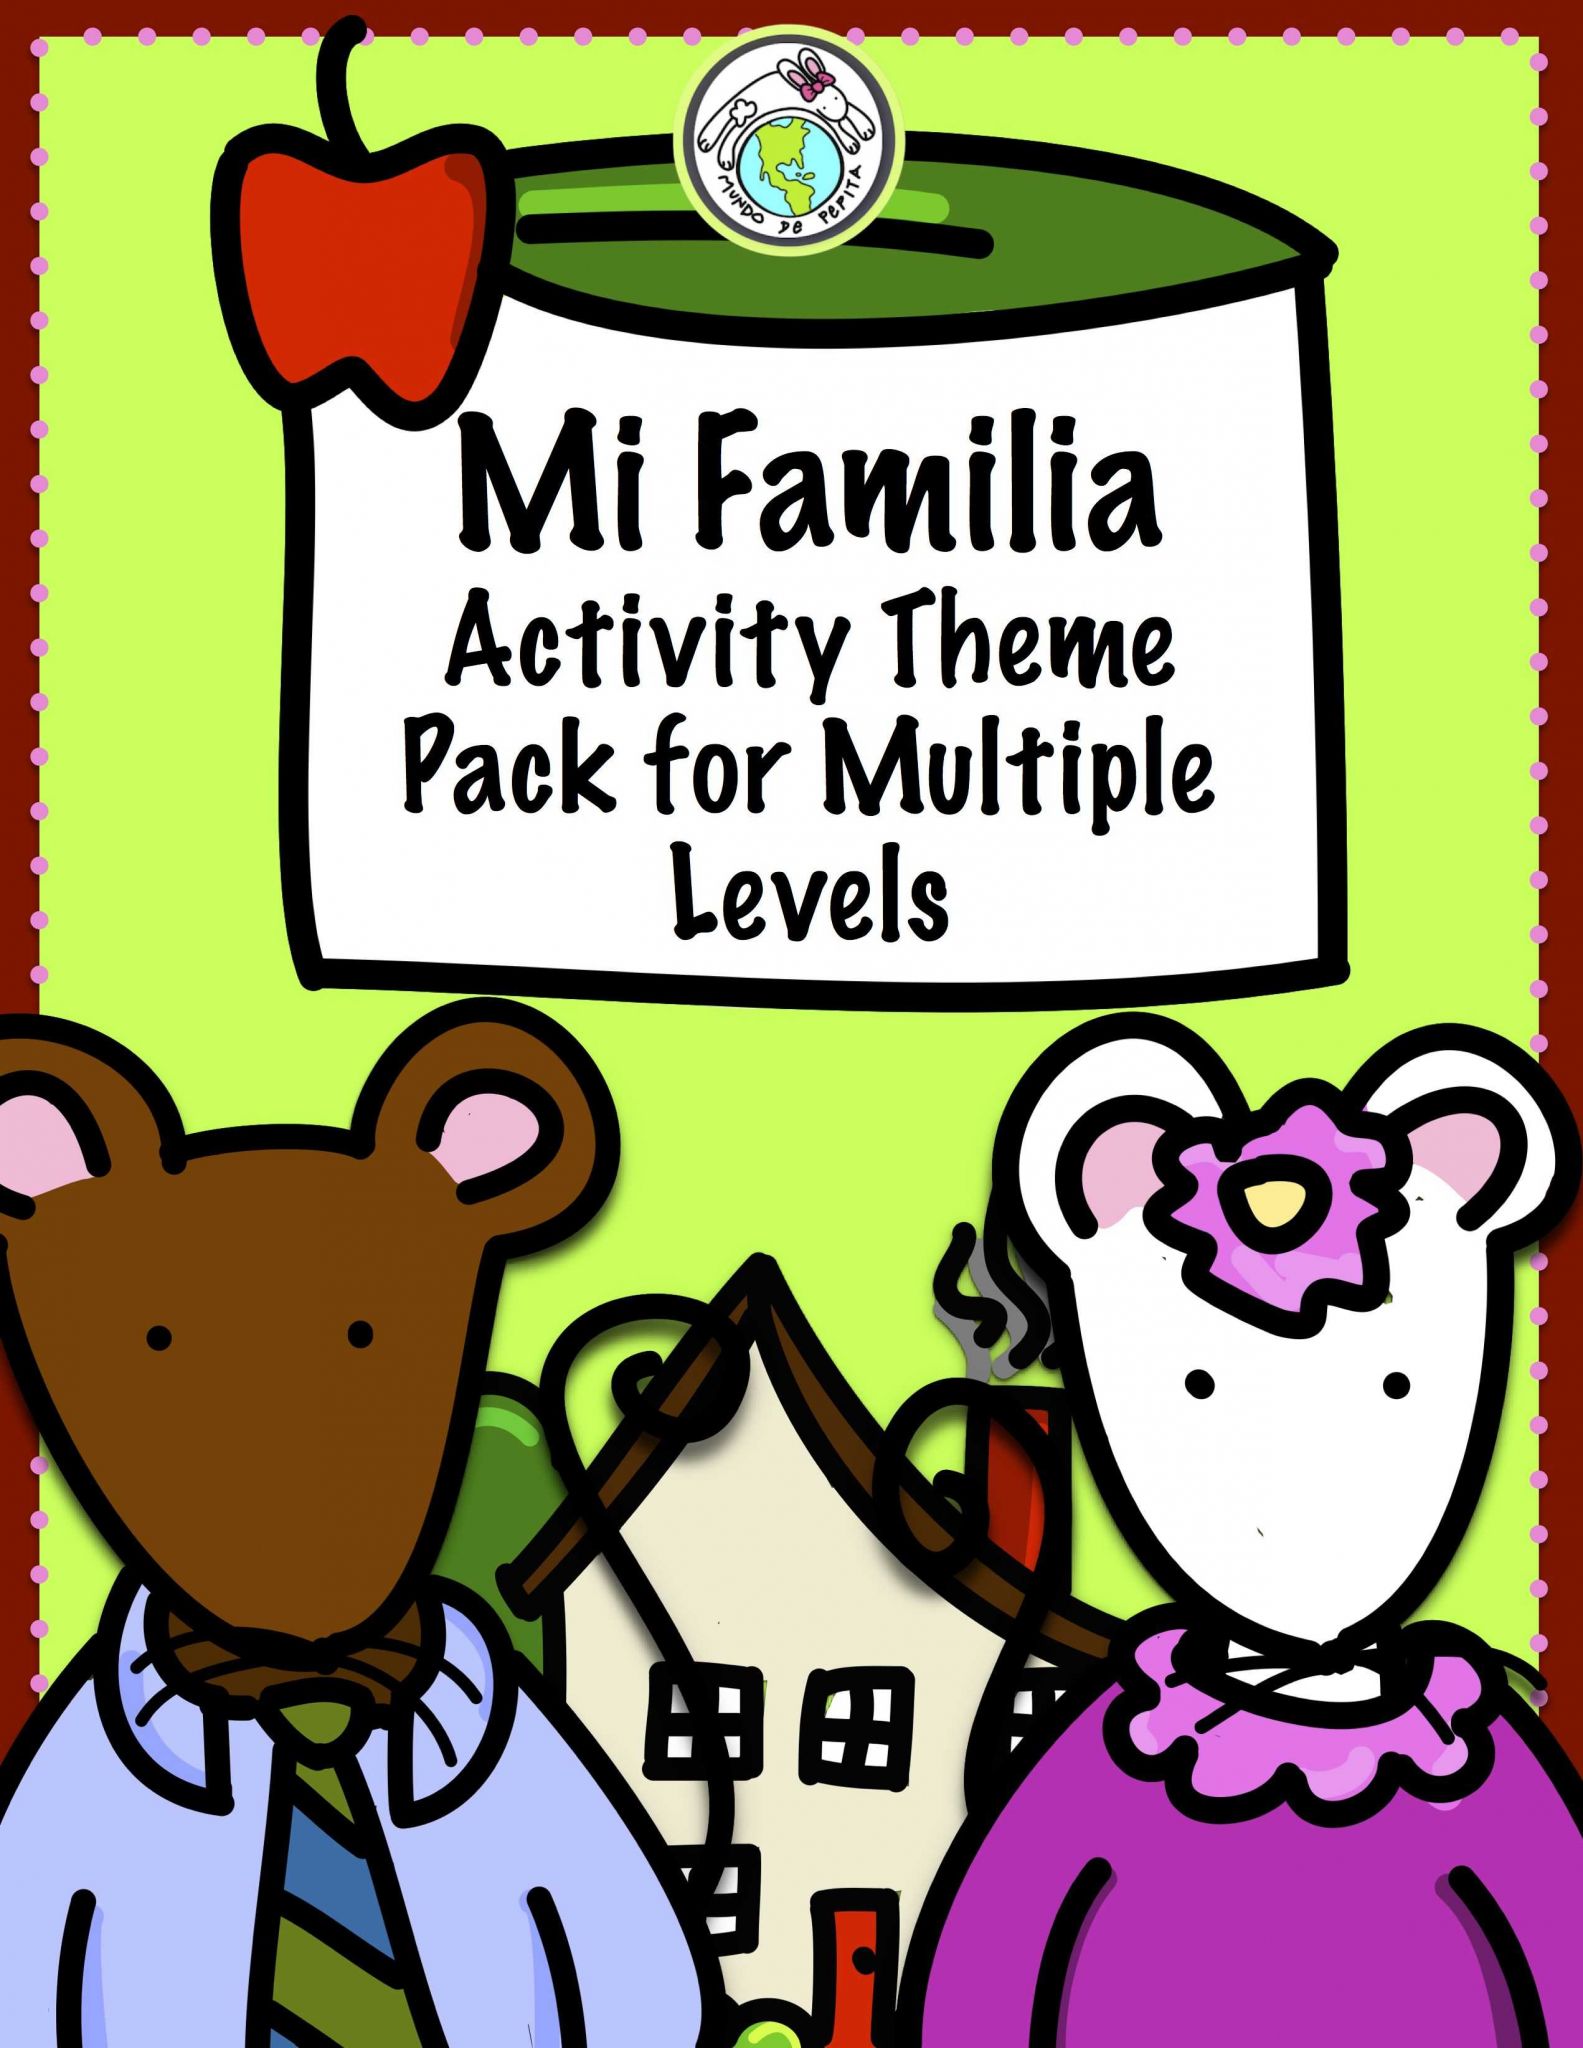 Spanish Family Worksheets Along with Teach Family theme In Spanish with Our Activity Pack Packed with